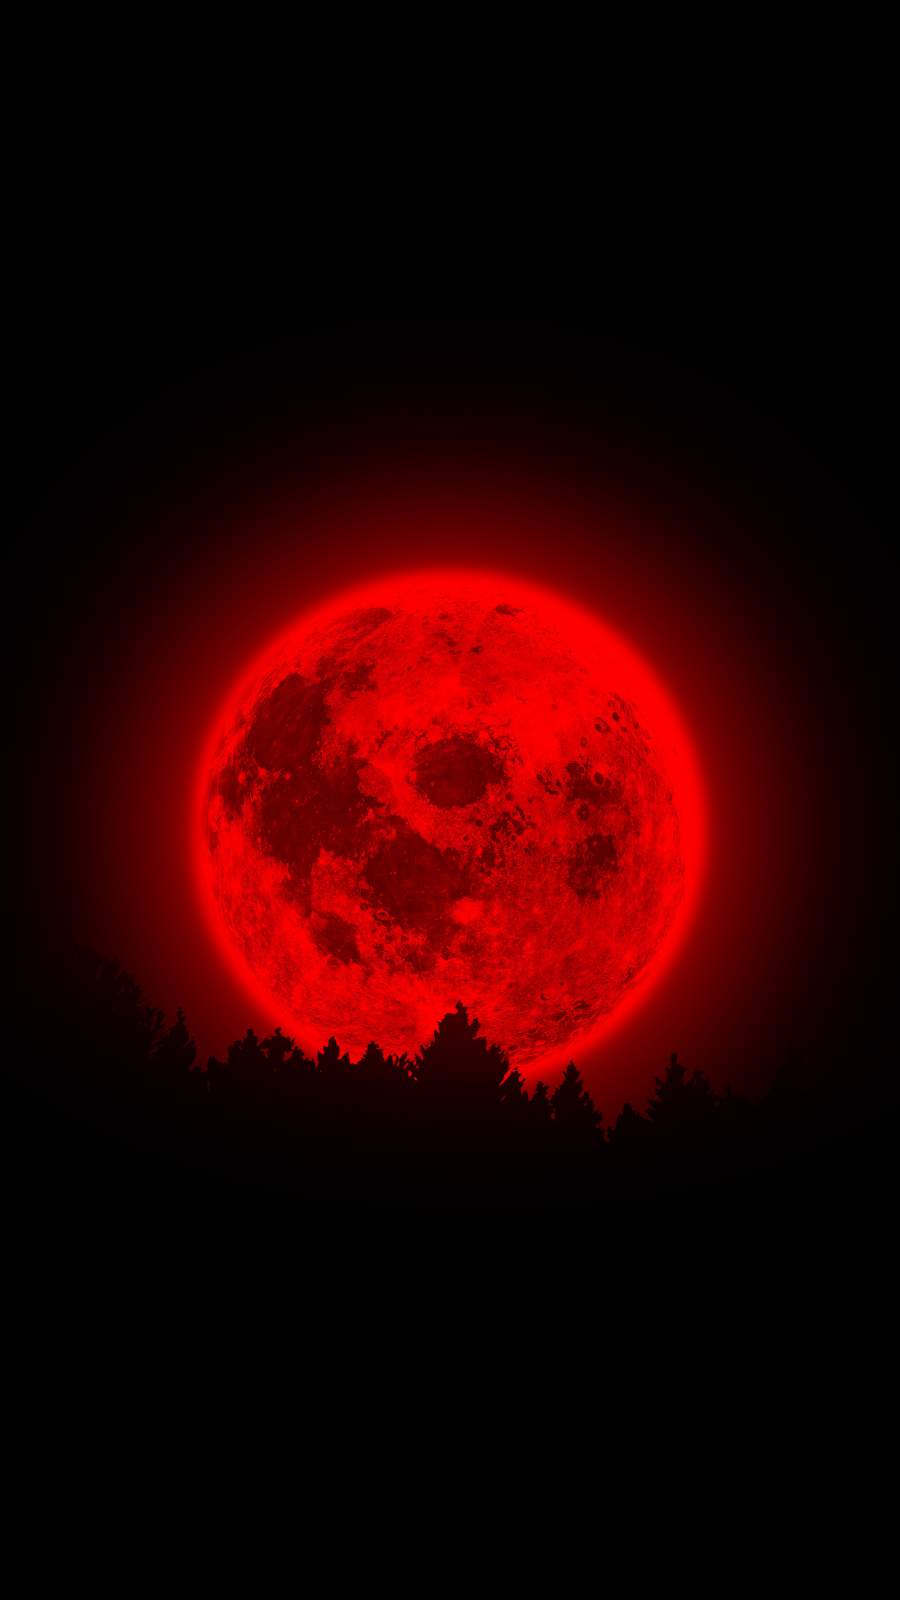 RED Moon IPhone Wallpaper - IPhone Wallpapers : iPhone Wallpapers